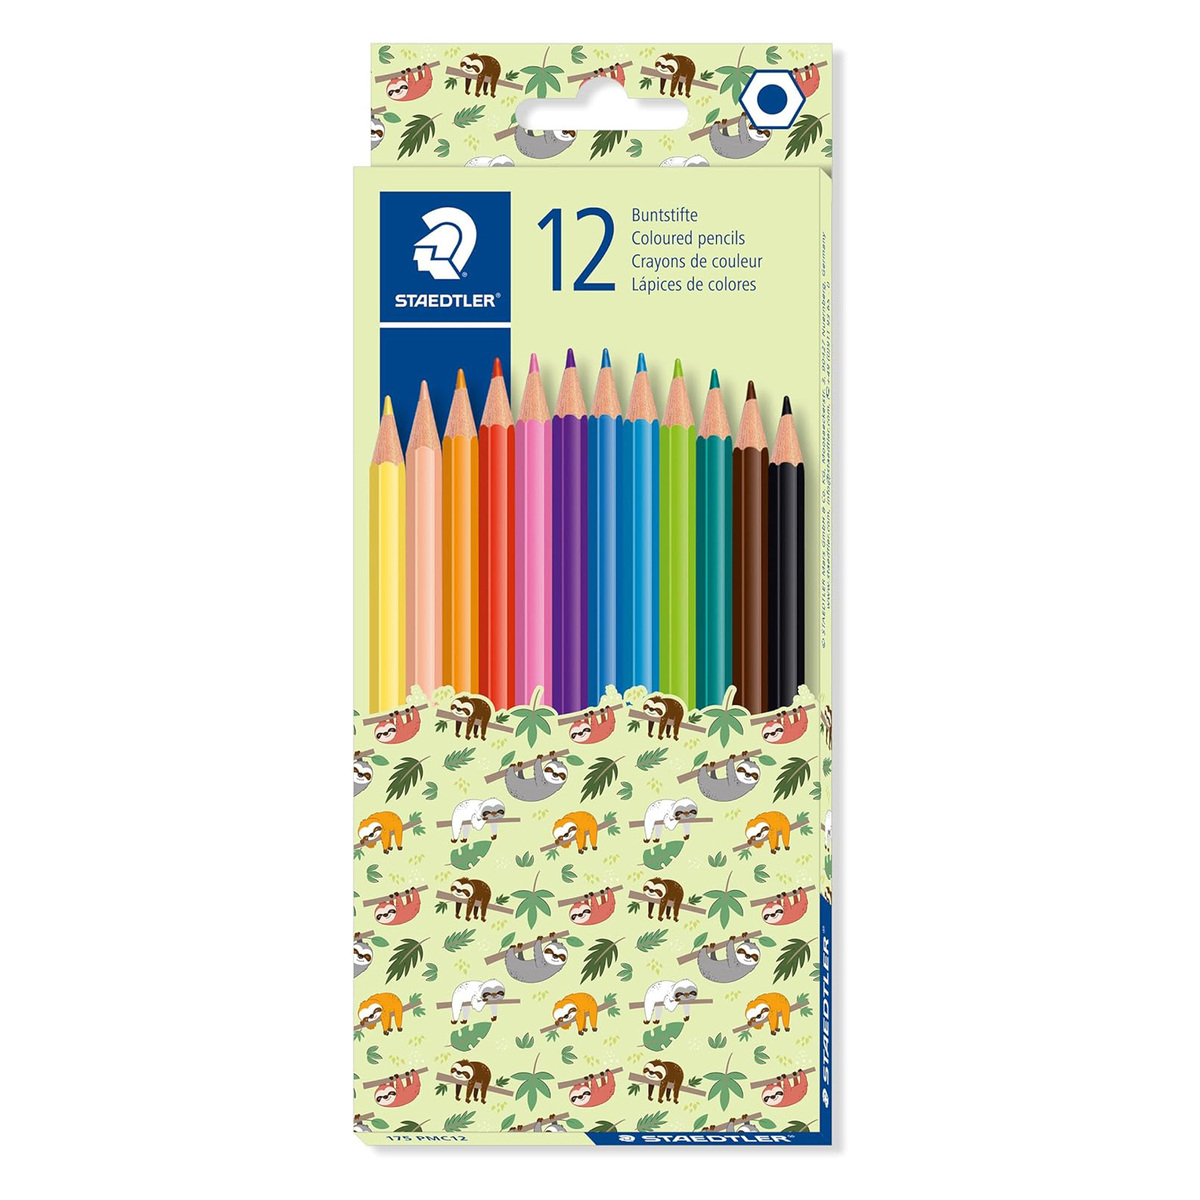 Staedtler Pattern Mix Coloured Pencil, 12 pcs, Assorted, ST-175-PMC12